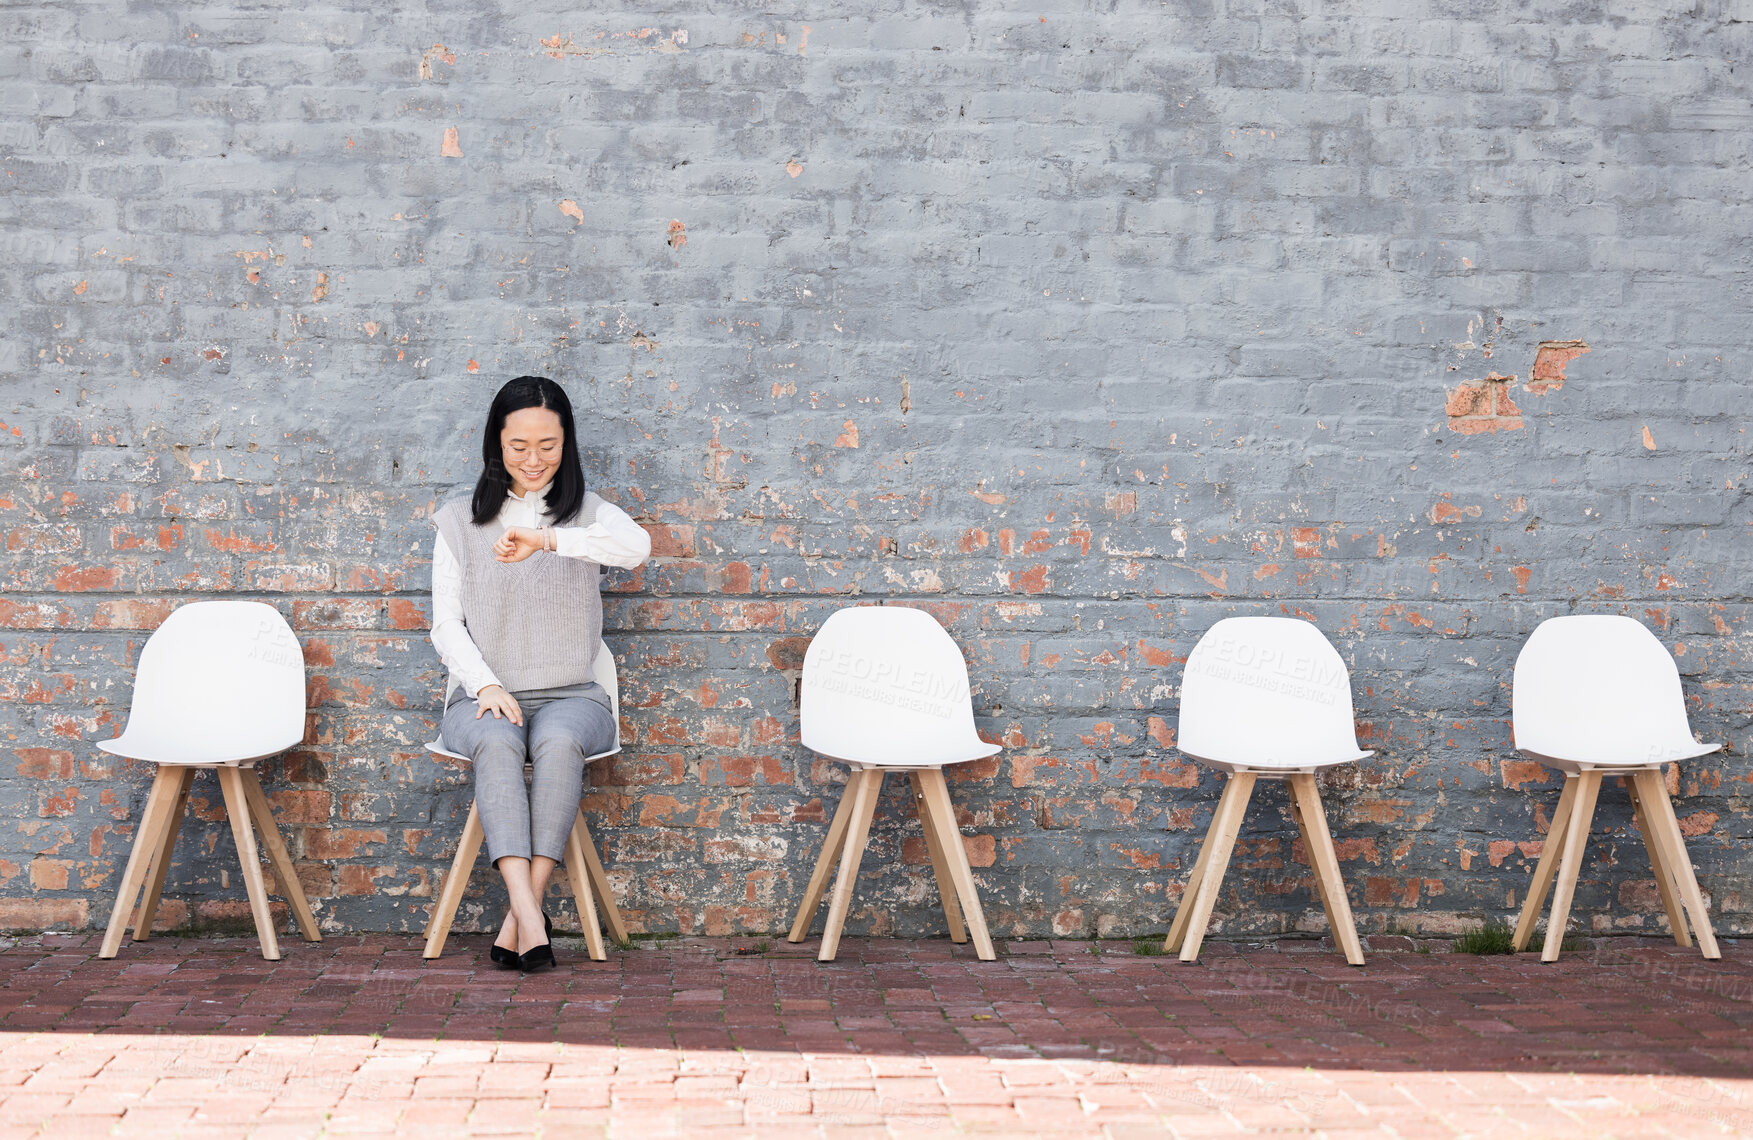 Buy stock photo Waiting, interview and woman check time for recruitment, job opportunity and human resources feedback. Asian person alone on chair looking at watch for career news, feedback and appointment schedule